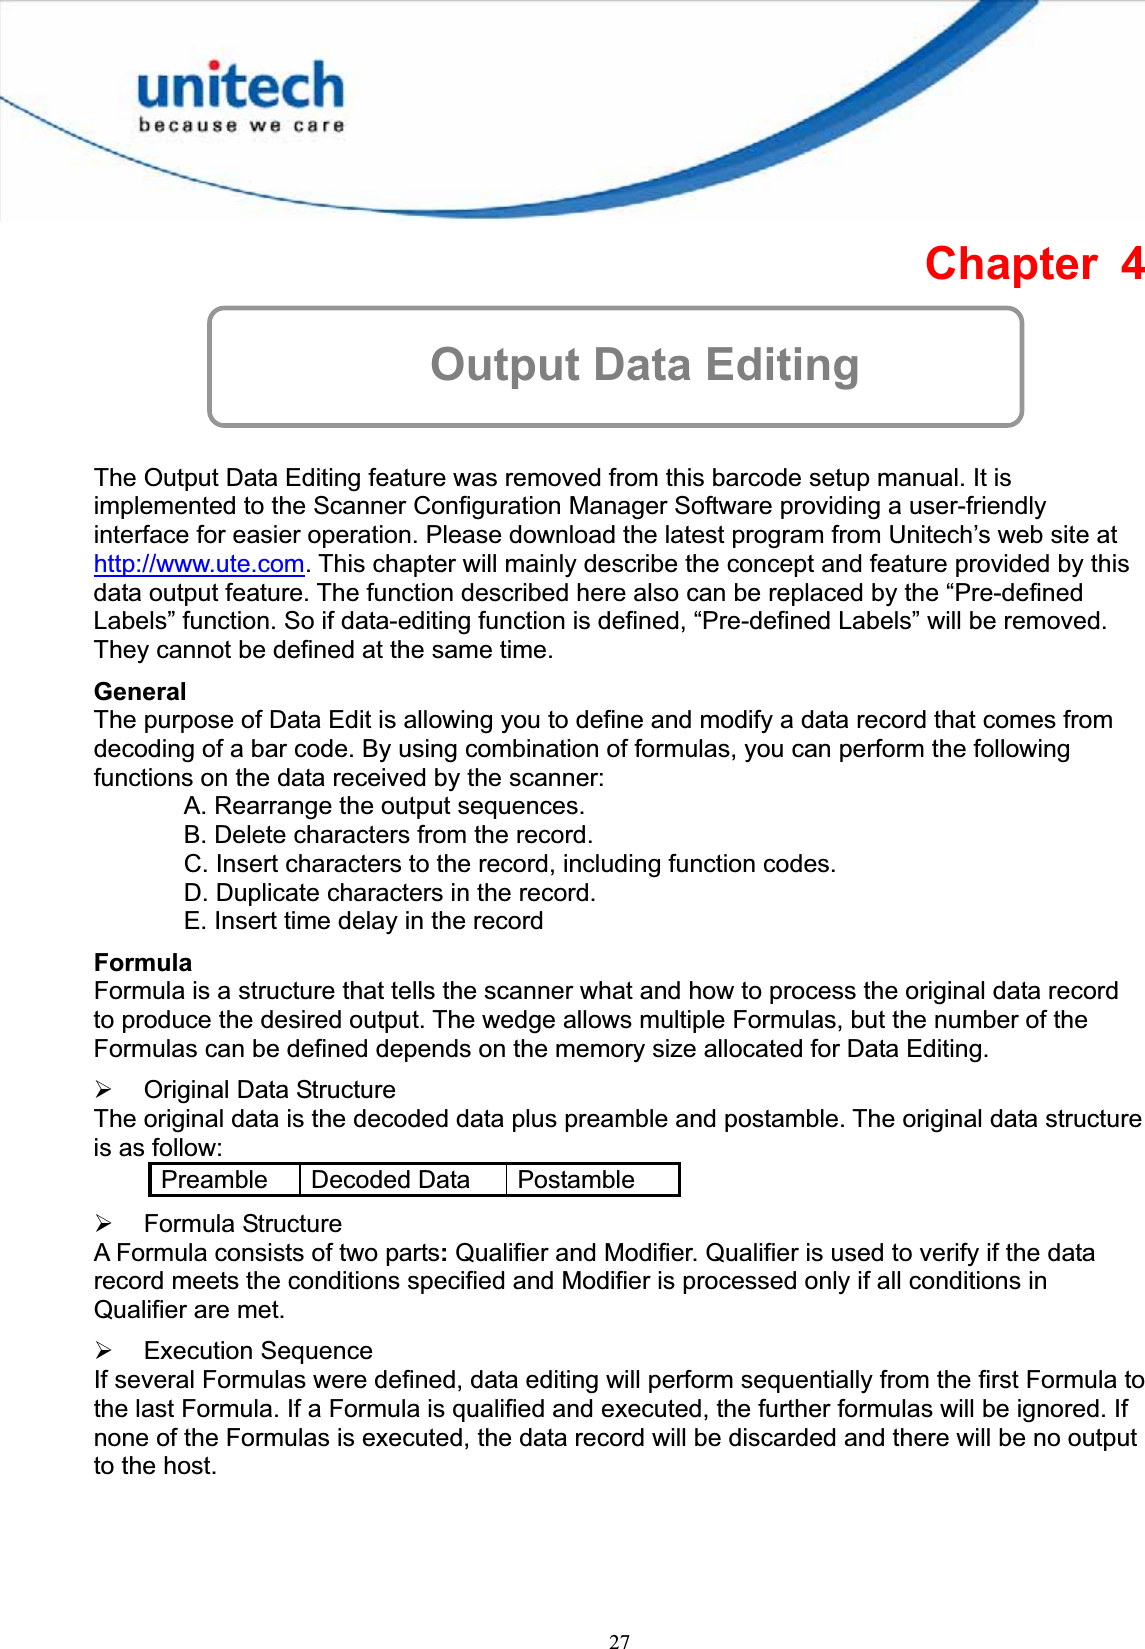 27Chapter 4 Output Data Editing The Output Data Editing feature was removed from this barcode setup manual. It is implemented to the Scanner Configuration Manager Software providing a user-friendly interface for easier operation. Please download the latest program from Unitech’s web site at http://www.ute.com. This chapter will mainly describe the concept and feature provided by this data output feature. The function described here also can be replaced by the “Pre-defined Labels” function. So if data-editing function is defined, “Pre-defined Labels” will be removed. They cannot be defined at the same time. GeneralThe purpose of Data Edit is allowing you to define and modify a data record that comes from decoding of a bar code. By using combination of formulas, you can perform the following functions on the data received by the scanner: A. Rearrange the output sequences. B. Delete characters from the record. C. Insert characters to the record, including function codes. D. Duplicate characters in the record. E. Insert time delay in the recordFormulaFormula is a structure that tells the scanner what and how to process the original data record to produce the desired output. The wedge allows multiple Formulas, but the number of the Formulas can be defined depends on the memory size allocated for Data Editing. ¾ Original Data Structure The original data is the decoded data plus preamble and postamble. The original data structure is as follow: Preamble Decoded Data  Postamble ¾ Formula Structure A Formula consists of two parts:Qualifier and Modifier. Qualifier is used to verify if the data record meets the conditions specified and Modifier is processed only if all conditions in Qualifier are met. ¾ Execution Sequence If several Formulas were defined, data editing will perform sequentially from the first Formula to the last Formula. If a Formula is qualified and executed, the further formulas will be ignored. If none of the Formulas is executed, the data record will be discarded and there will be no output to the host. 